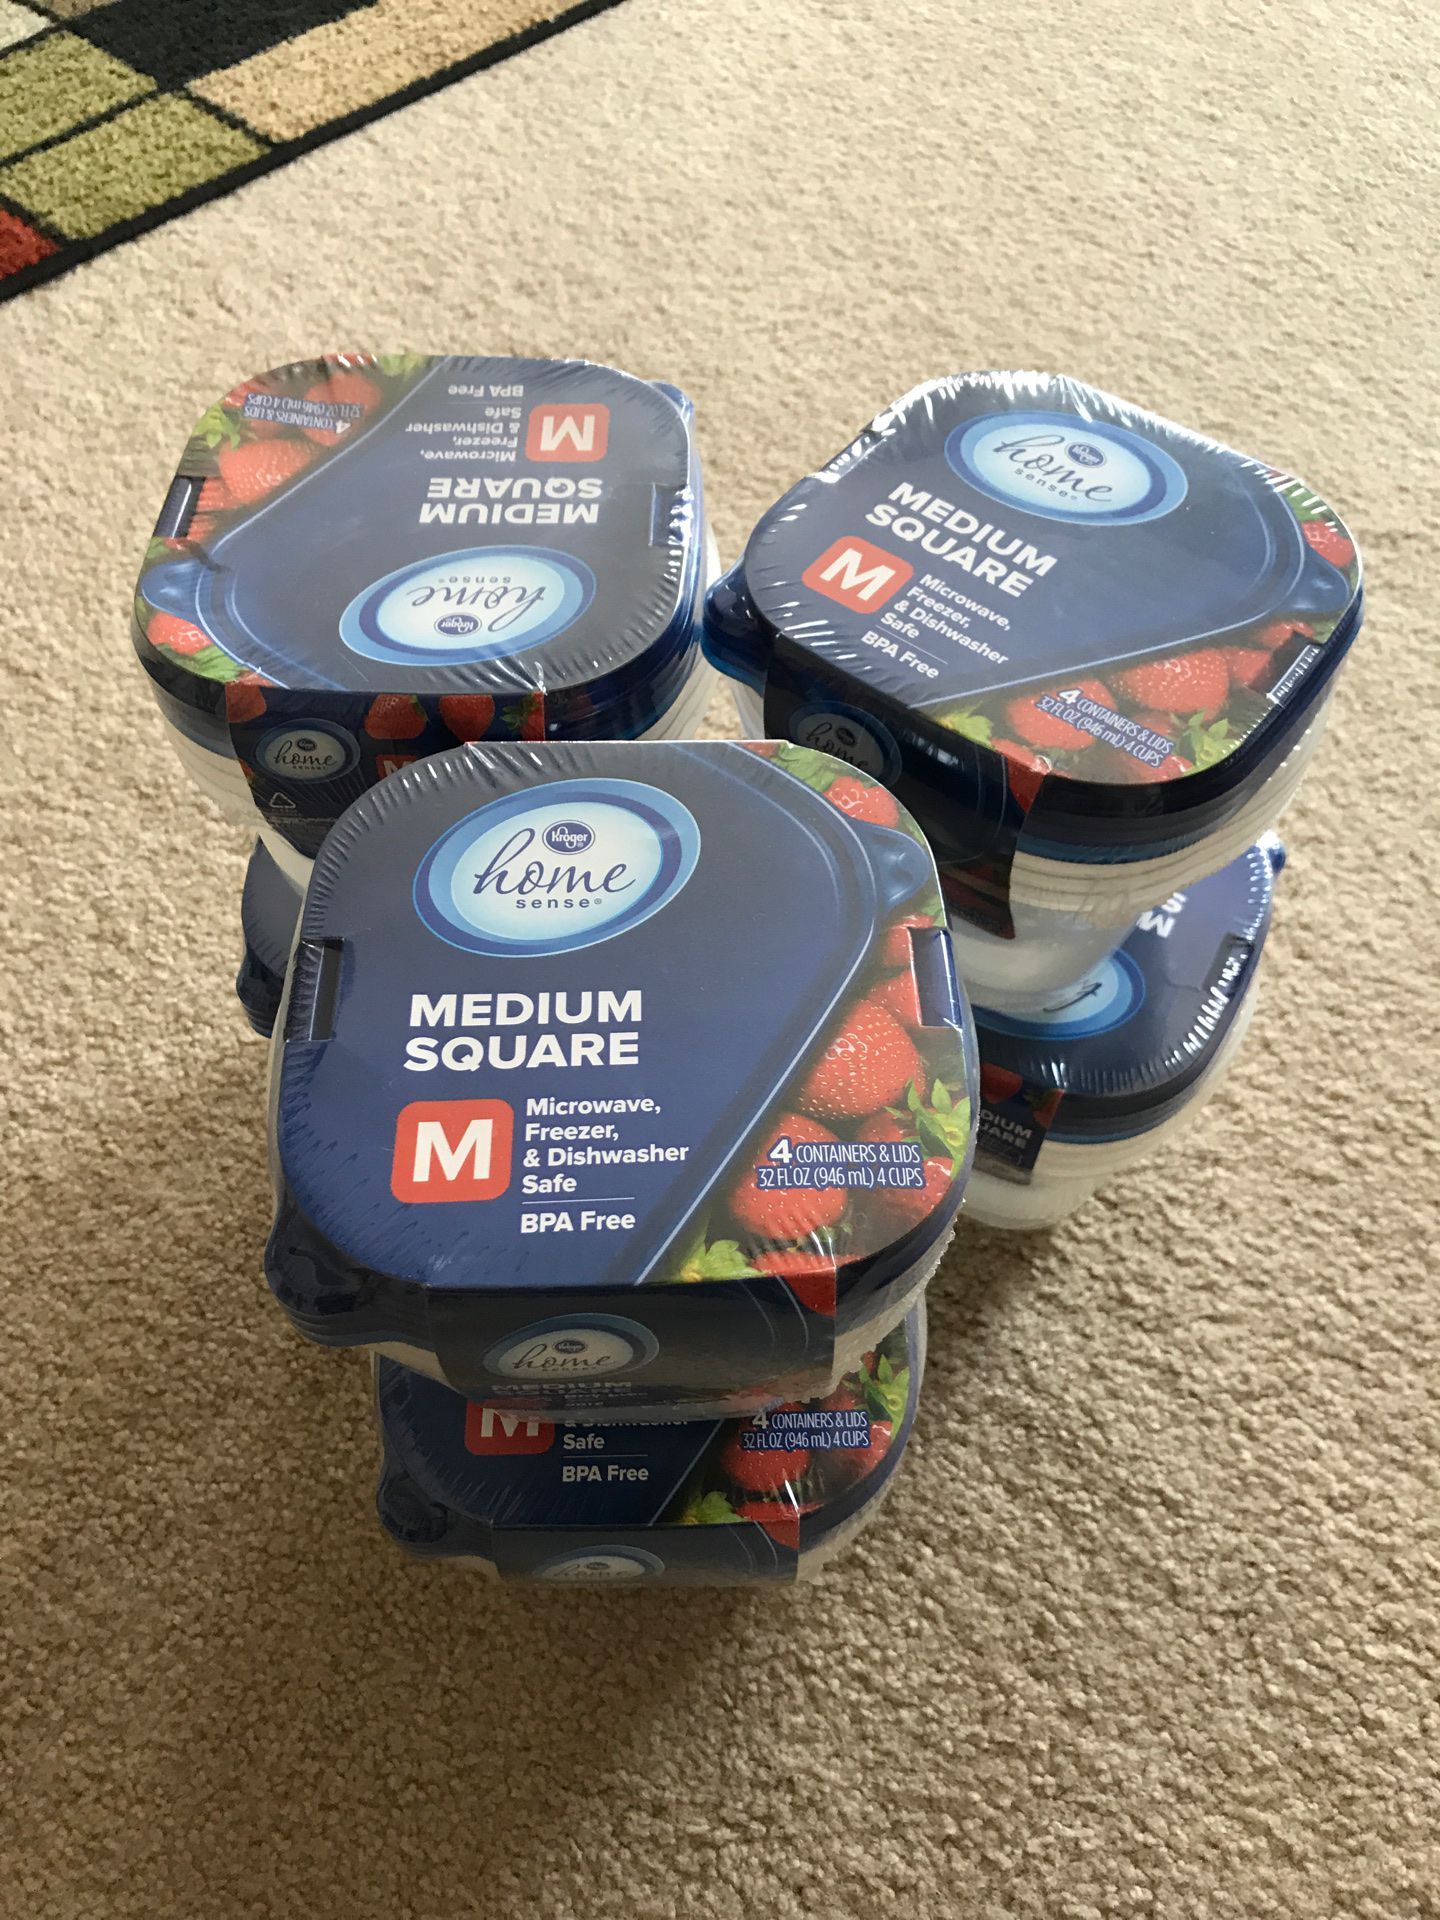 Storage containers brand new unopened